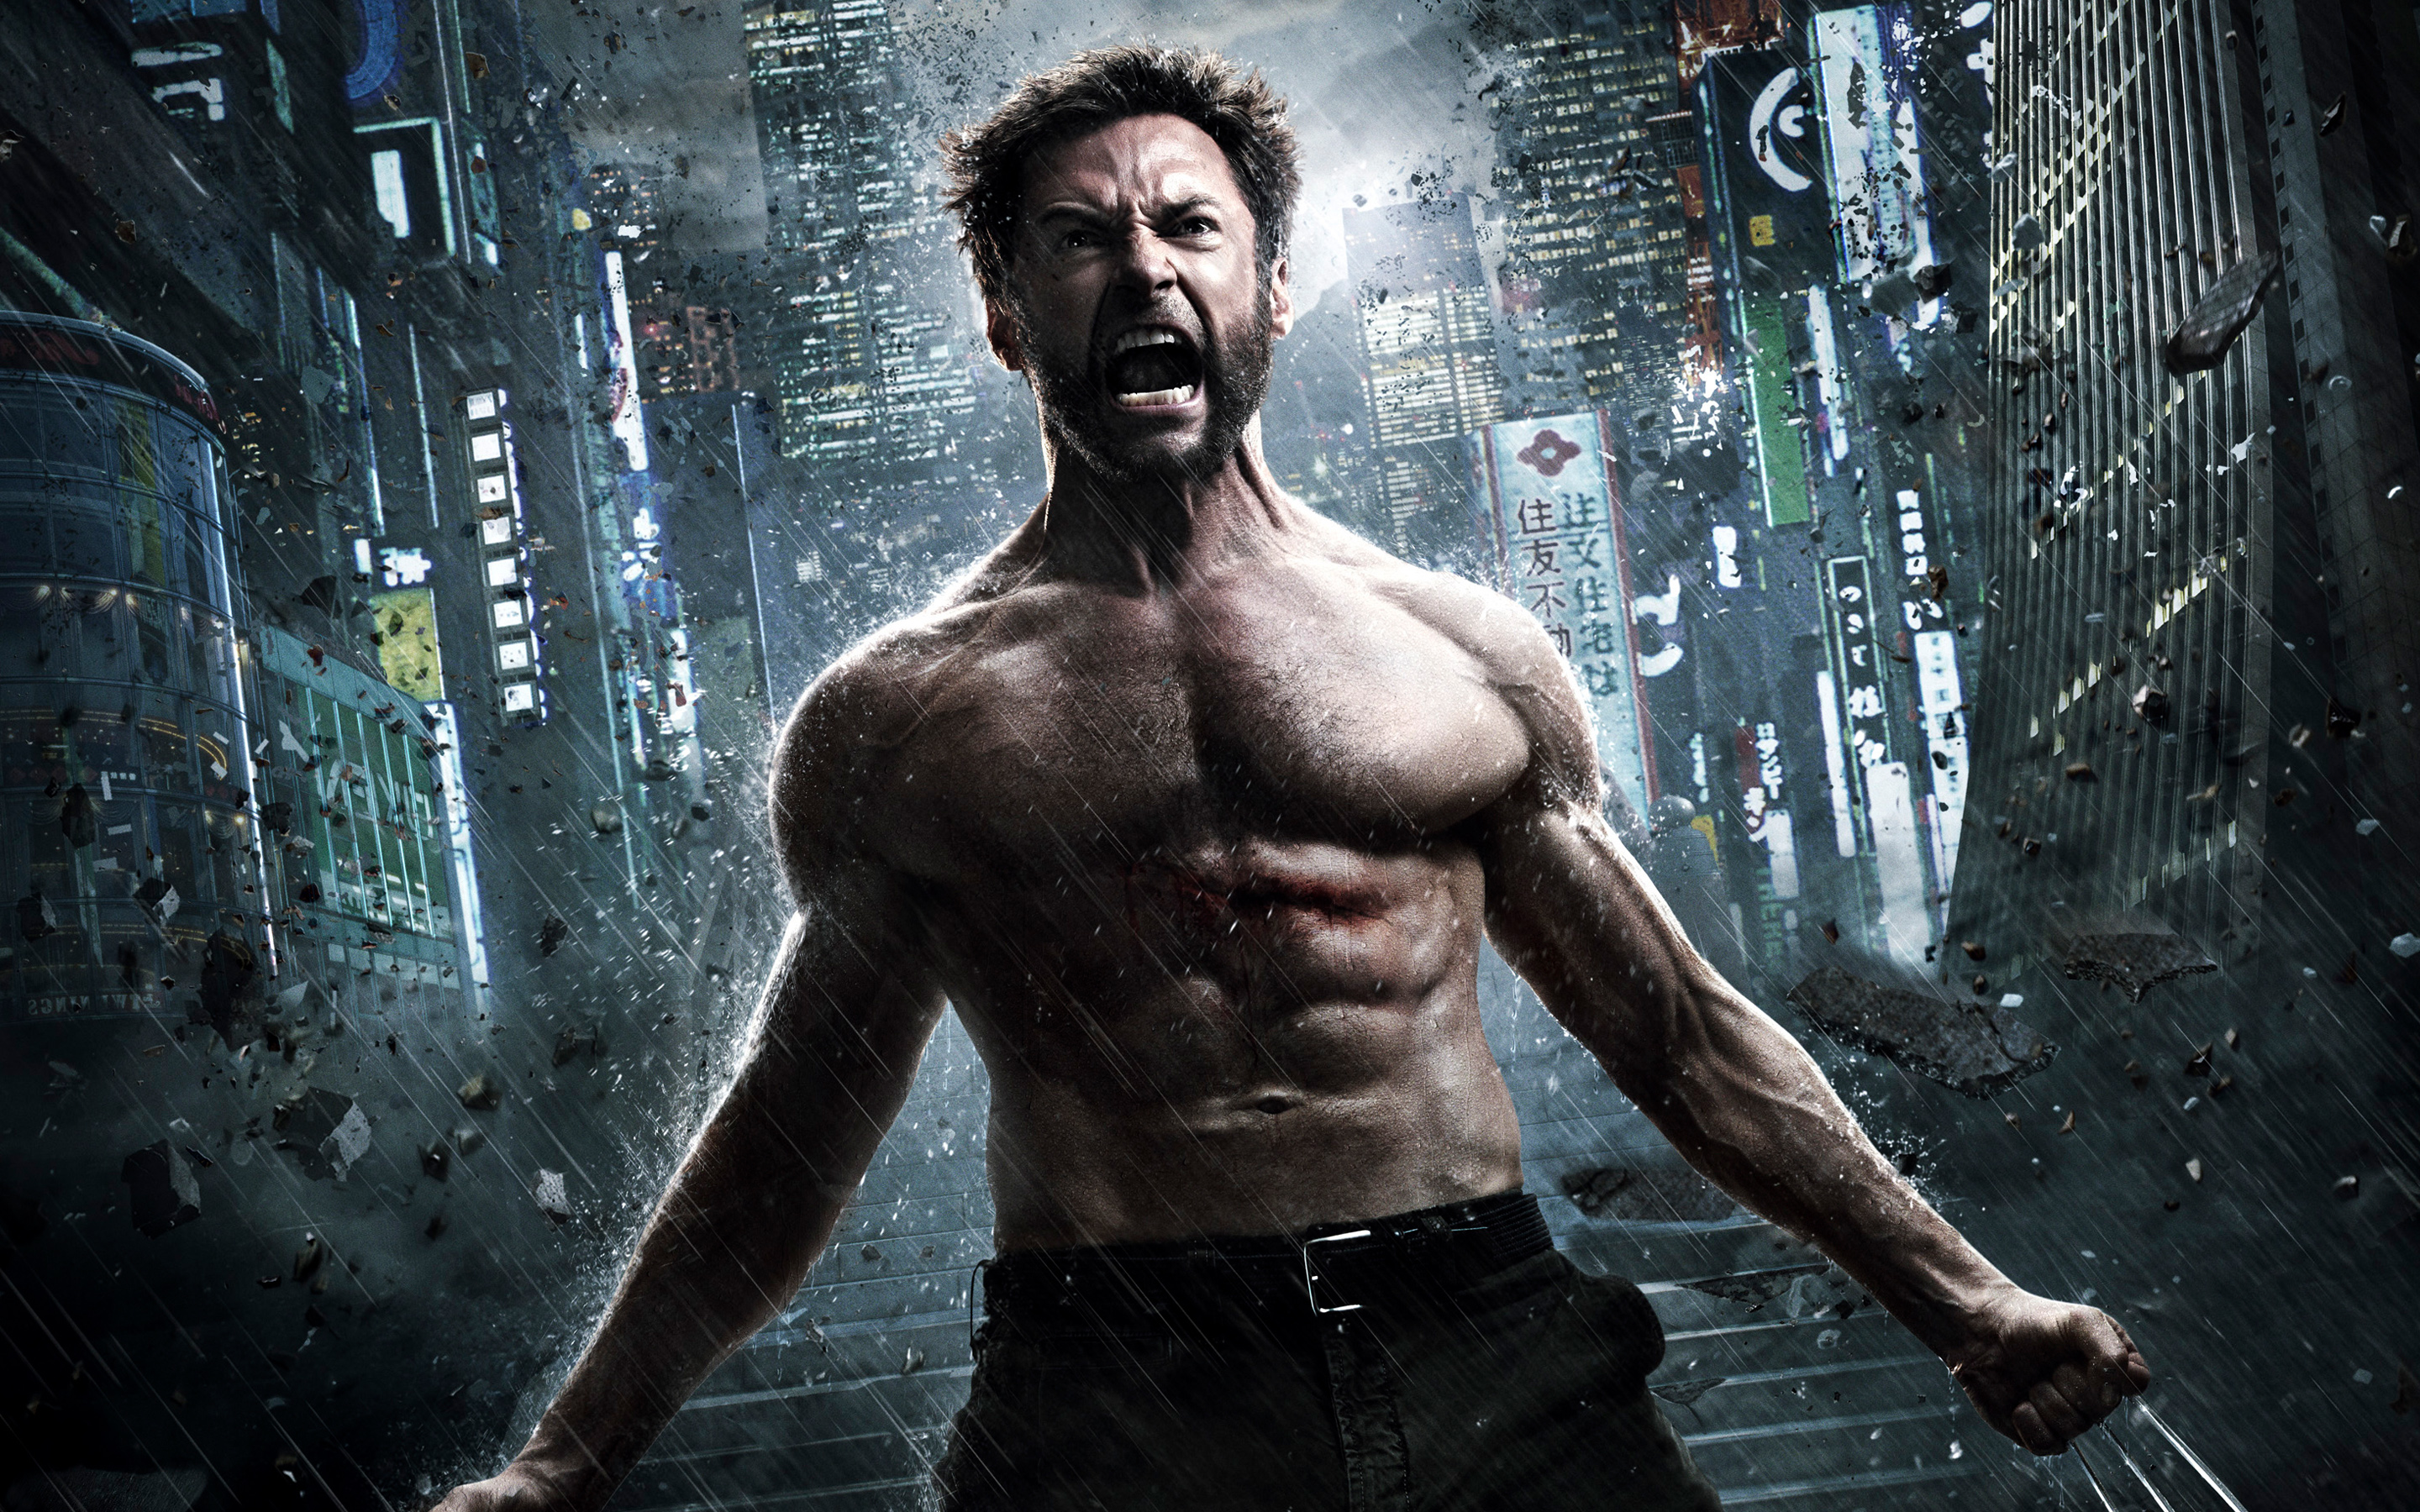 The Wolverine Wallpaper HD